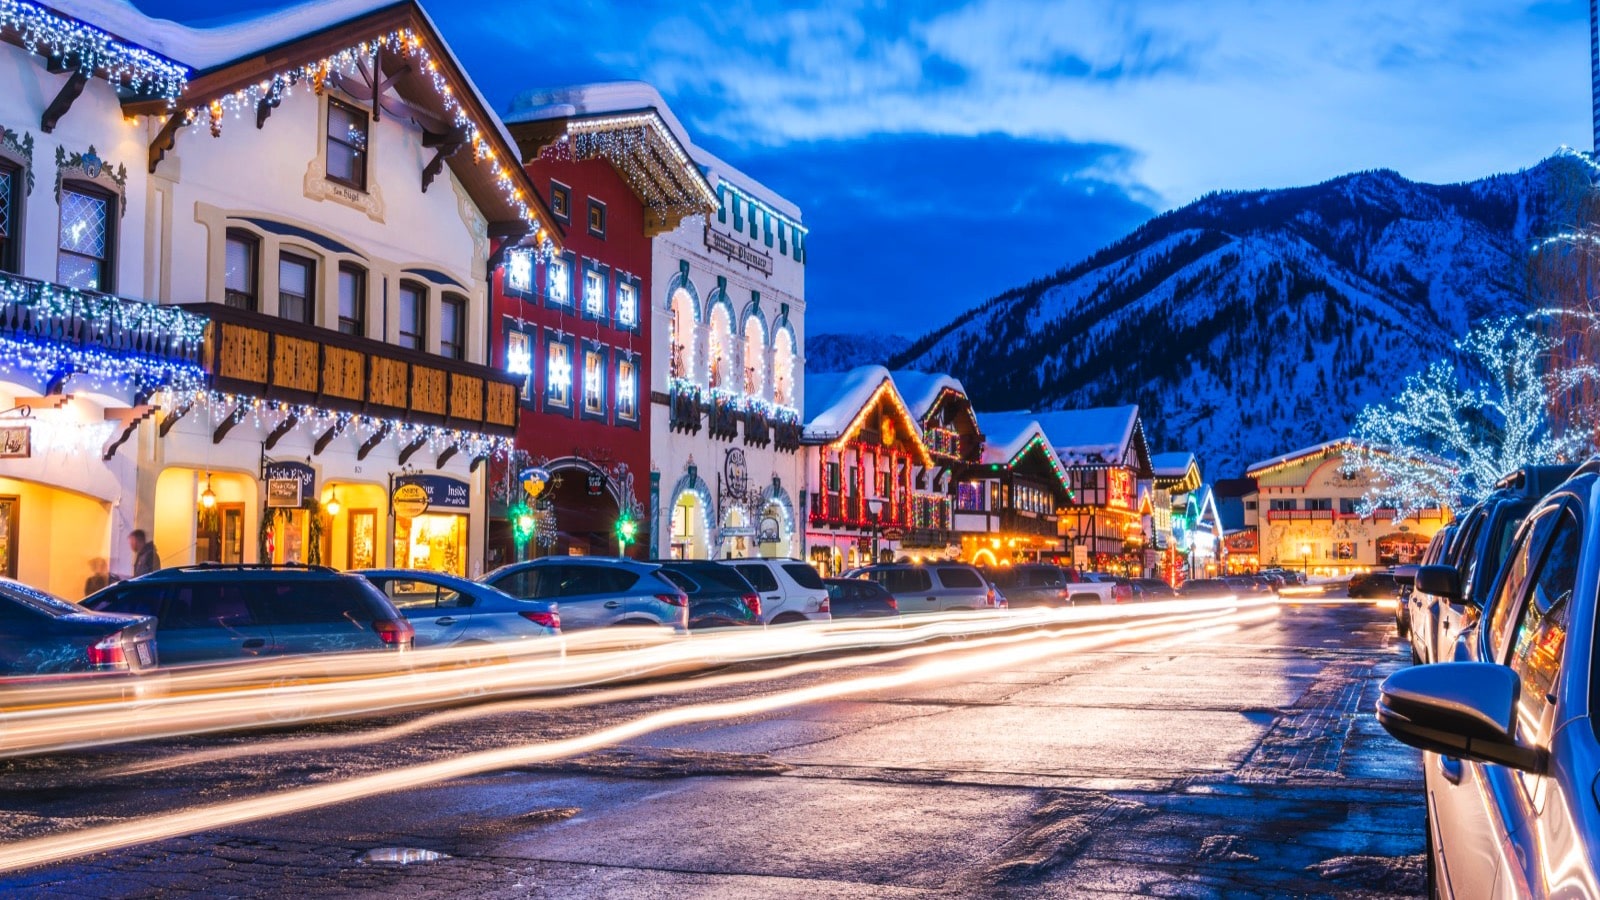 <p>Step into a Bavarian-style village nestled in the Cascade Mountains in Leavenworth, Washington!</p><p>Once a booming mining town, Leavenworth became a ghost town after gold and timber became harder to find. In 1930, the town debuted as an aesthetic alpine village with a backdrop of scenic mountains, and since then, its success has boomed, attracting more than two million visitors yearly.</p><p>Called the Christmas Town, Leavenworth is especially popular during the holiday season, hosting an international Santa Claus exhibition, a gingerbread competition, and a reindeer farm!</p>